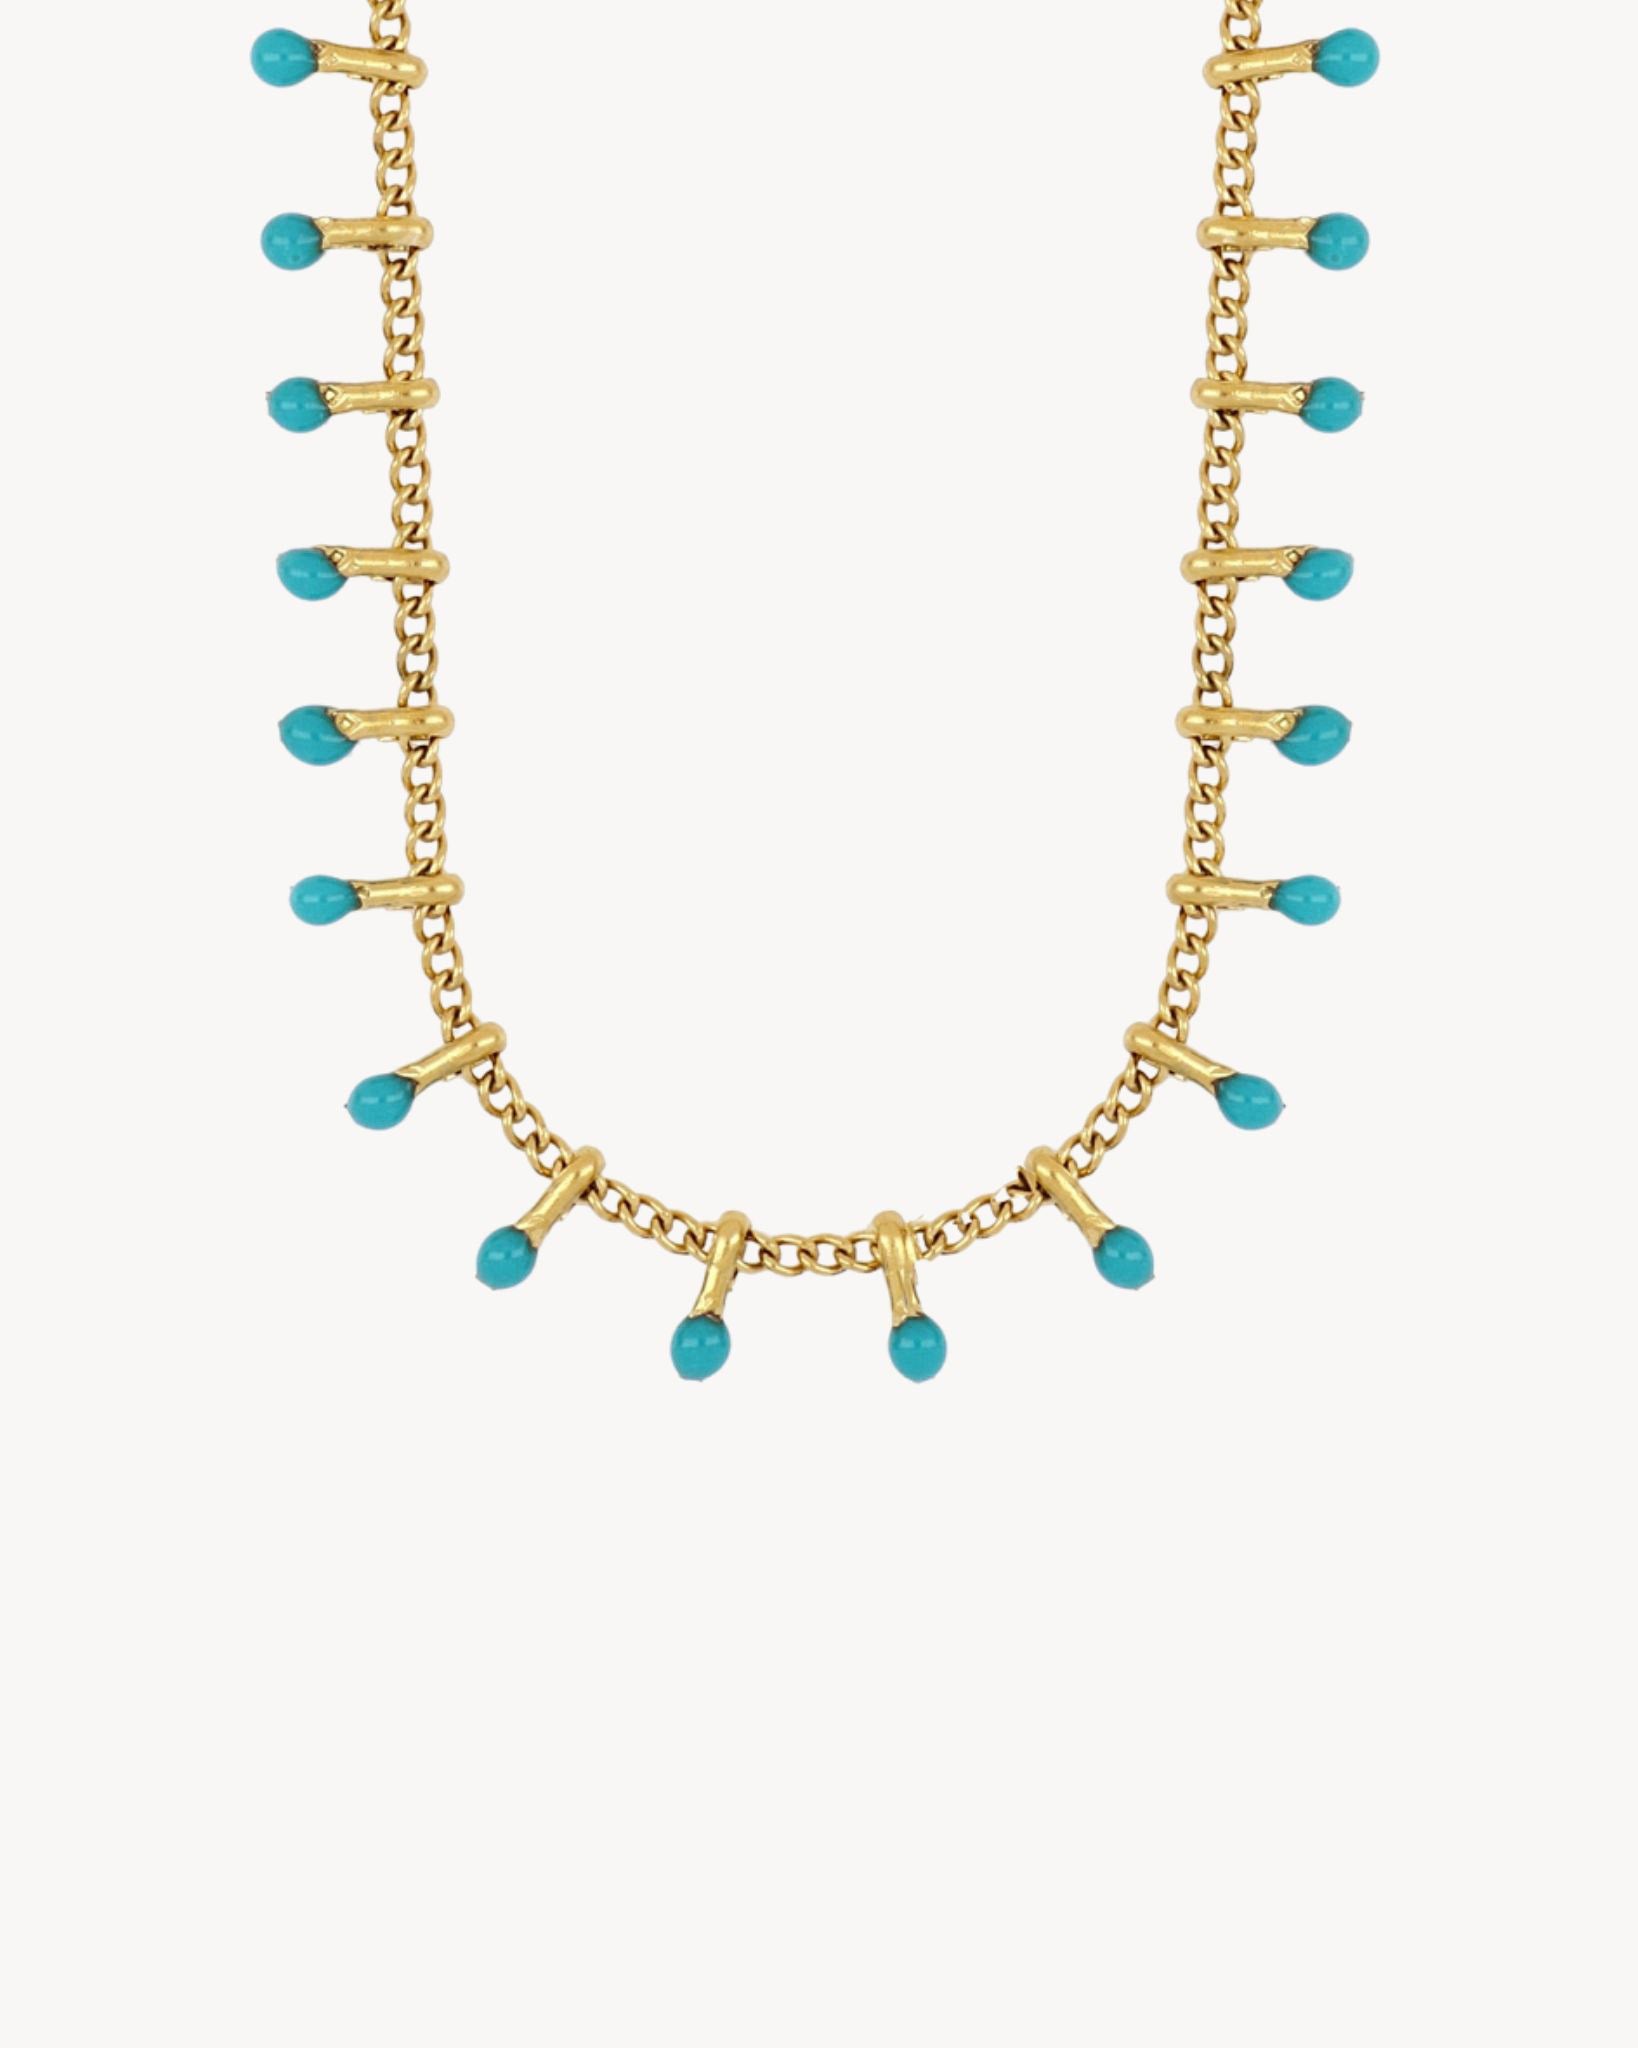 TURQUOISE TEARS NECKLACE | GOLDEN STEEL